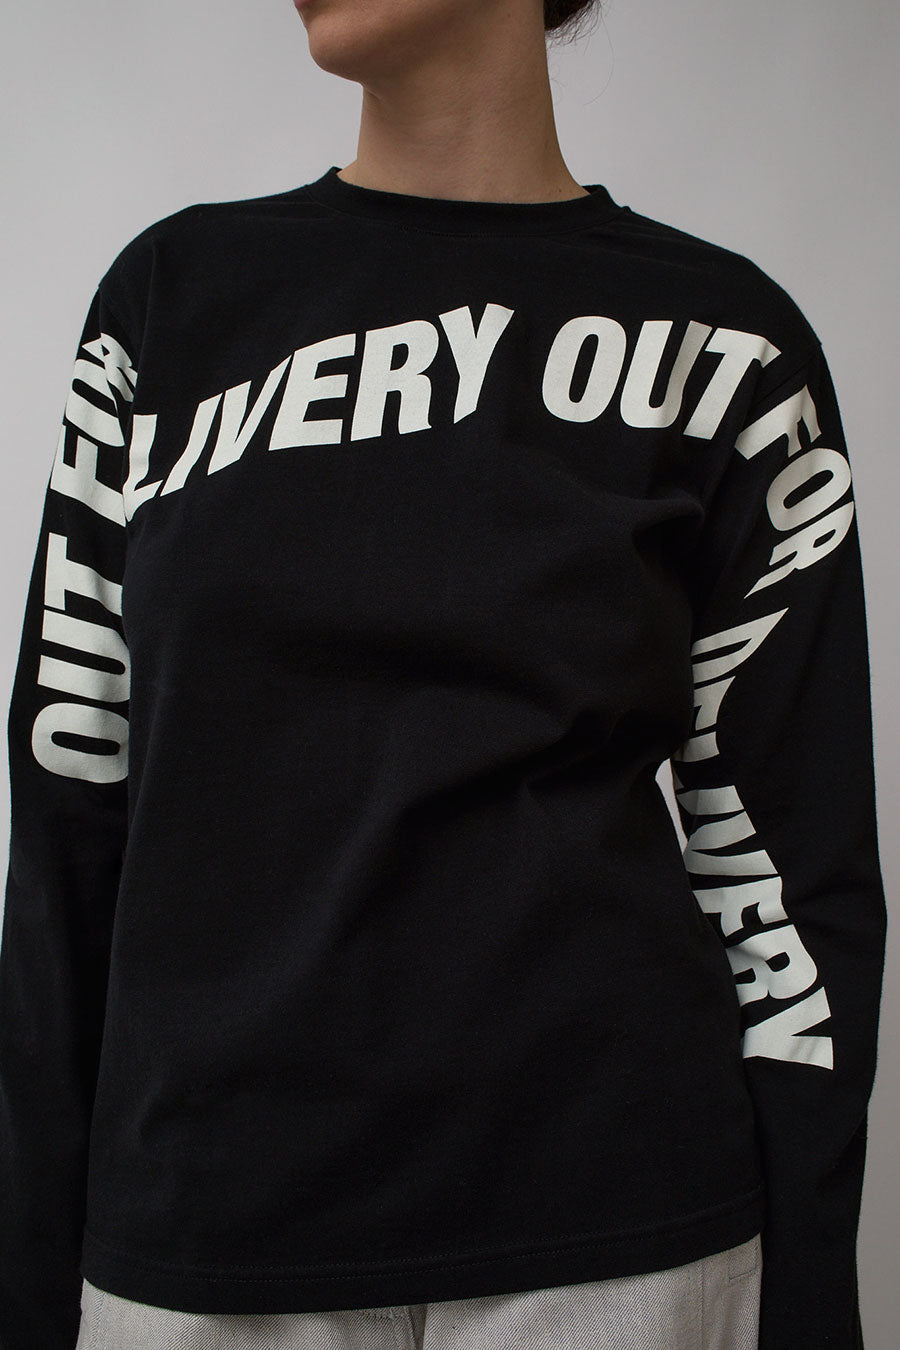 Henrik Vibskov Out for Delivery LS Tee in Black